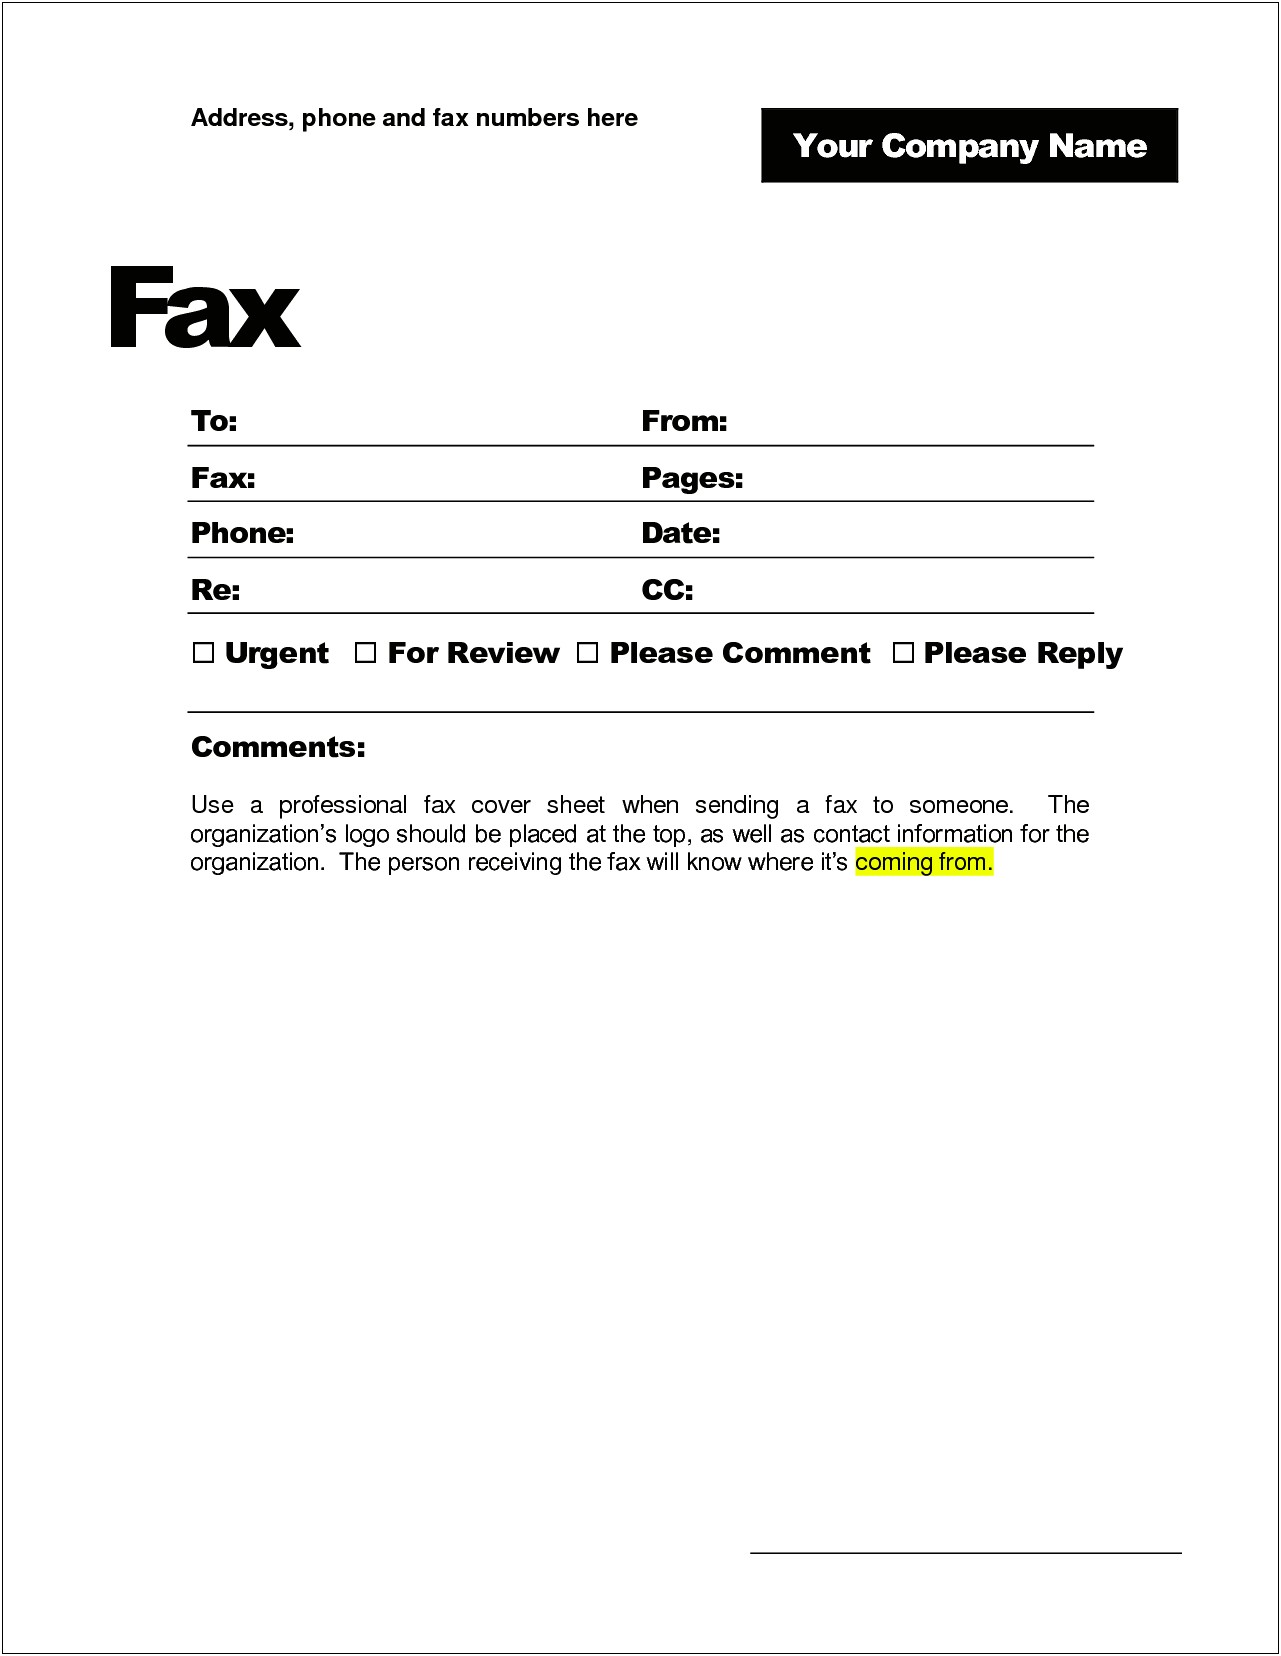 Free Fax Cover Sheet Templates For Mac